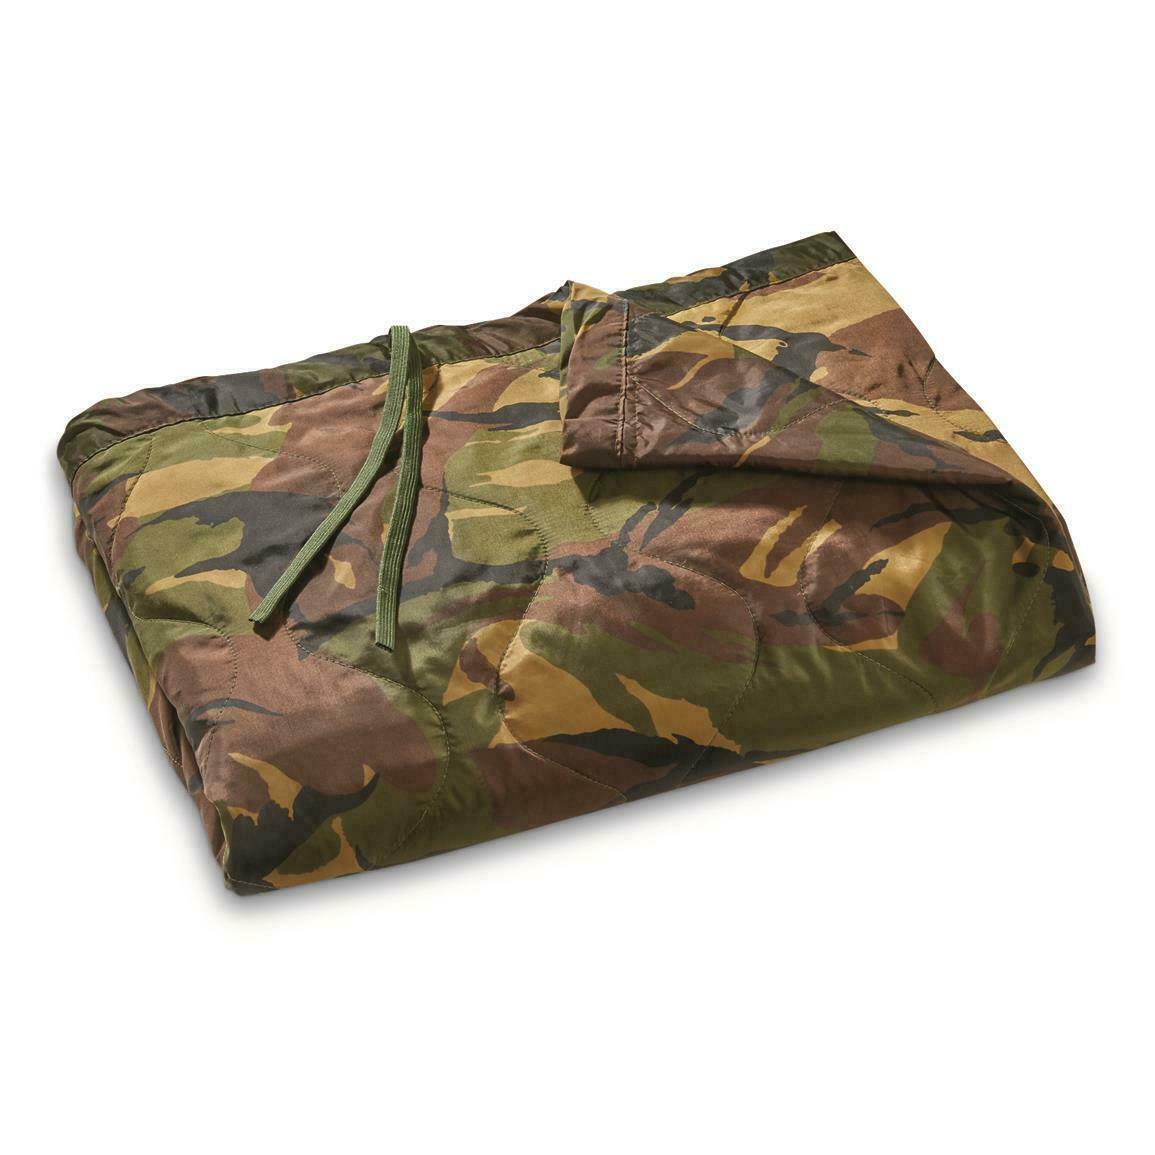 Dutch Military Issue Poncho Liner Wet Cold Weather DPM Camouflage Woobie Blanket